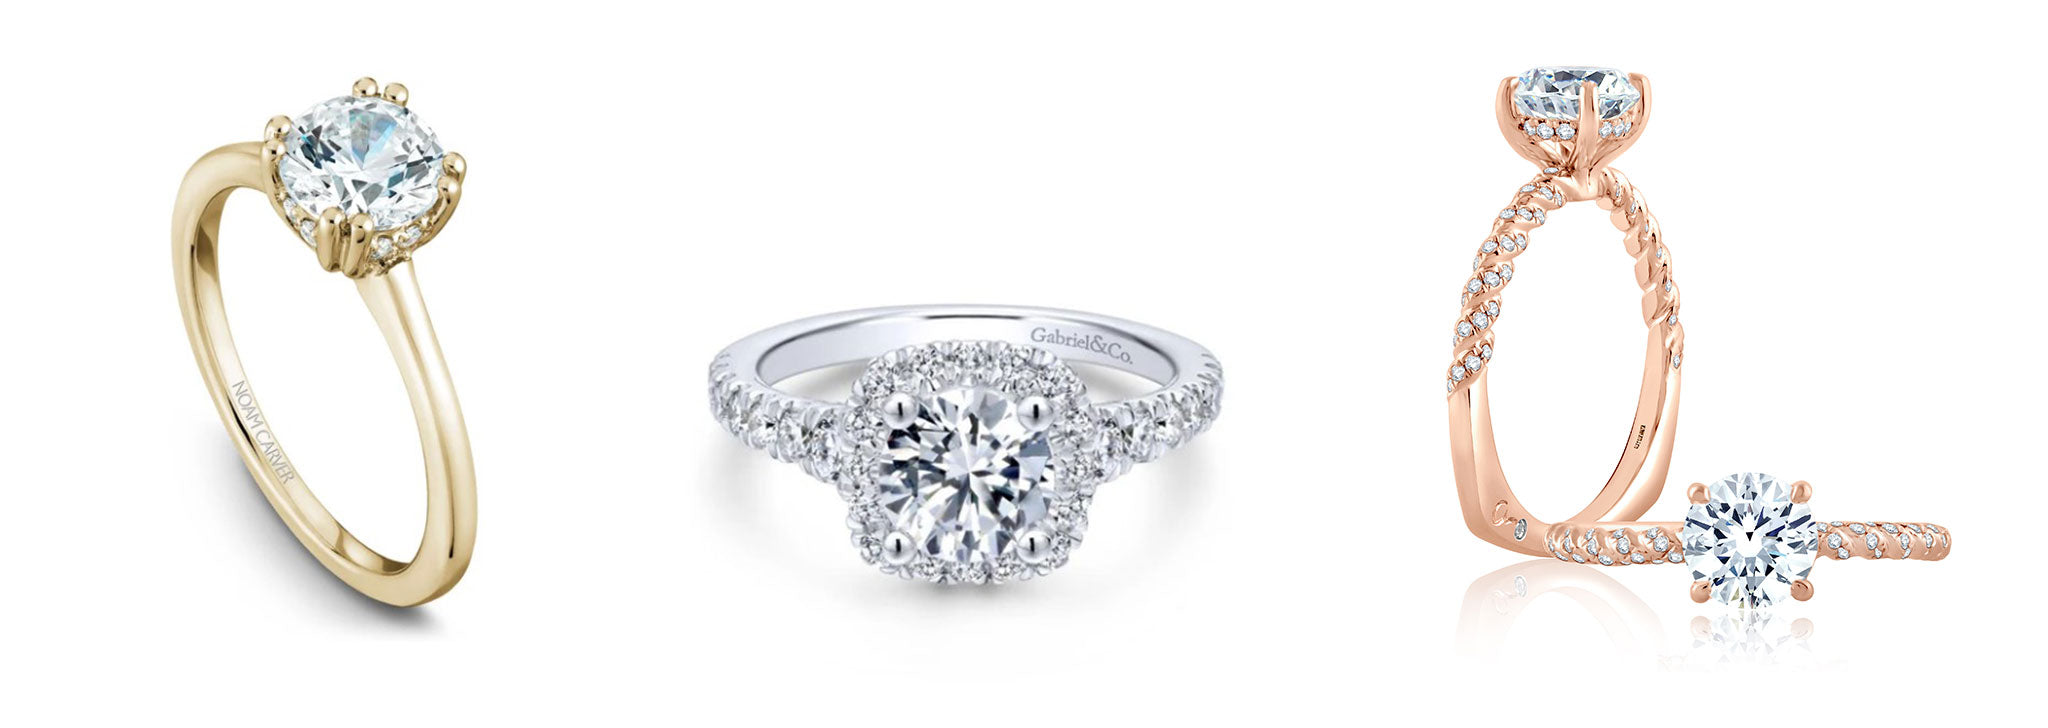 A Guide To Platinum Wedding Rings | The Wedding Avenue